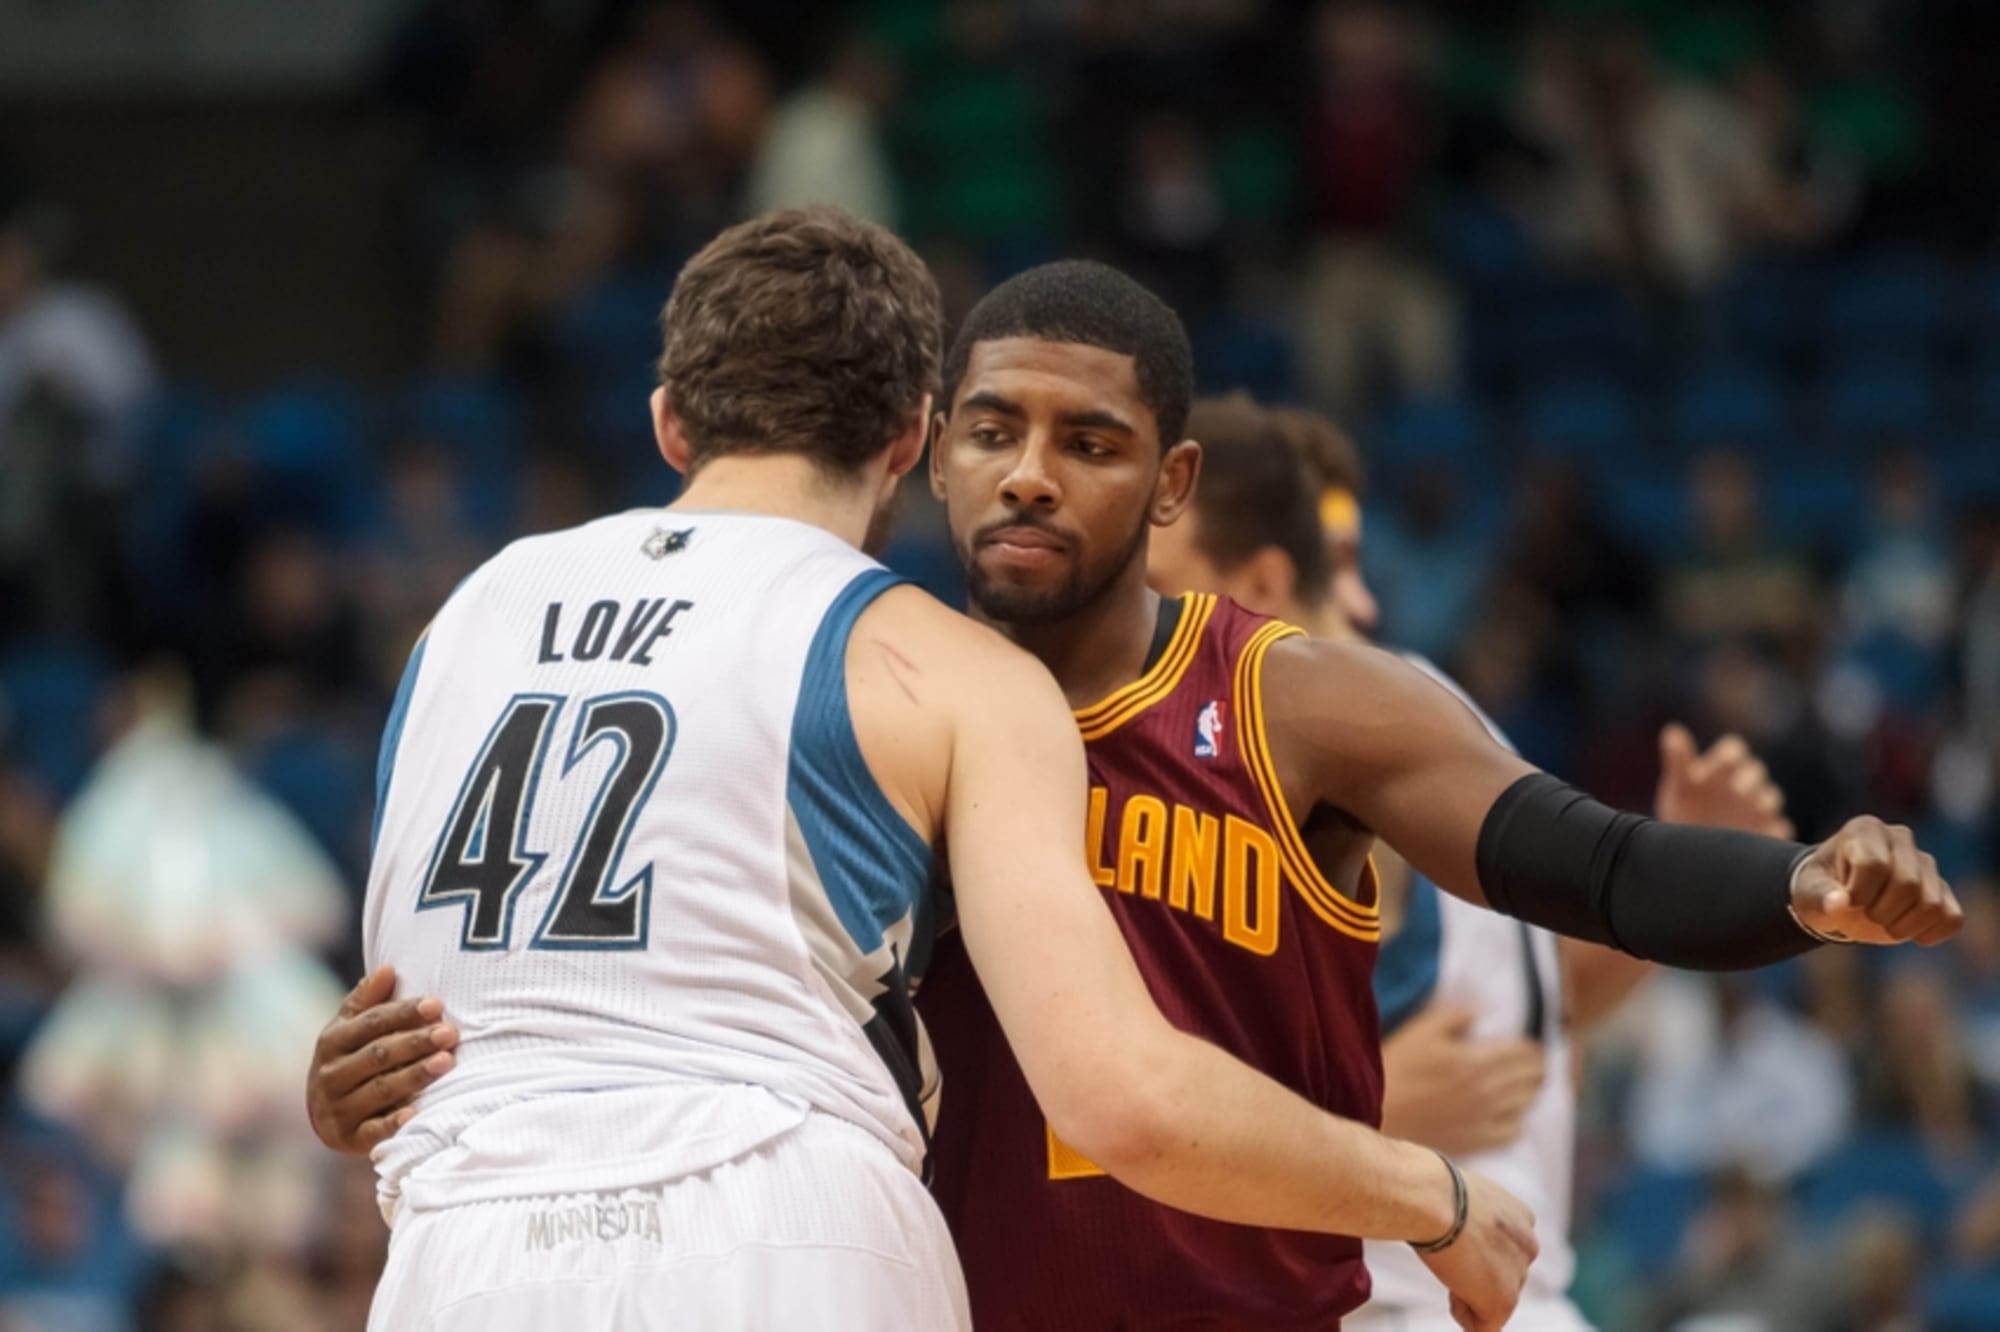 Should Kyrie Irving and Kevin Love have their Cavs jerseys retired?